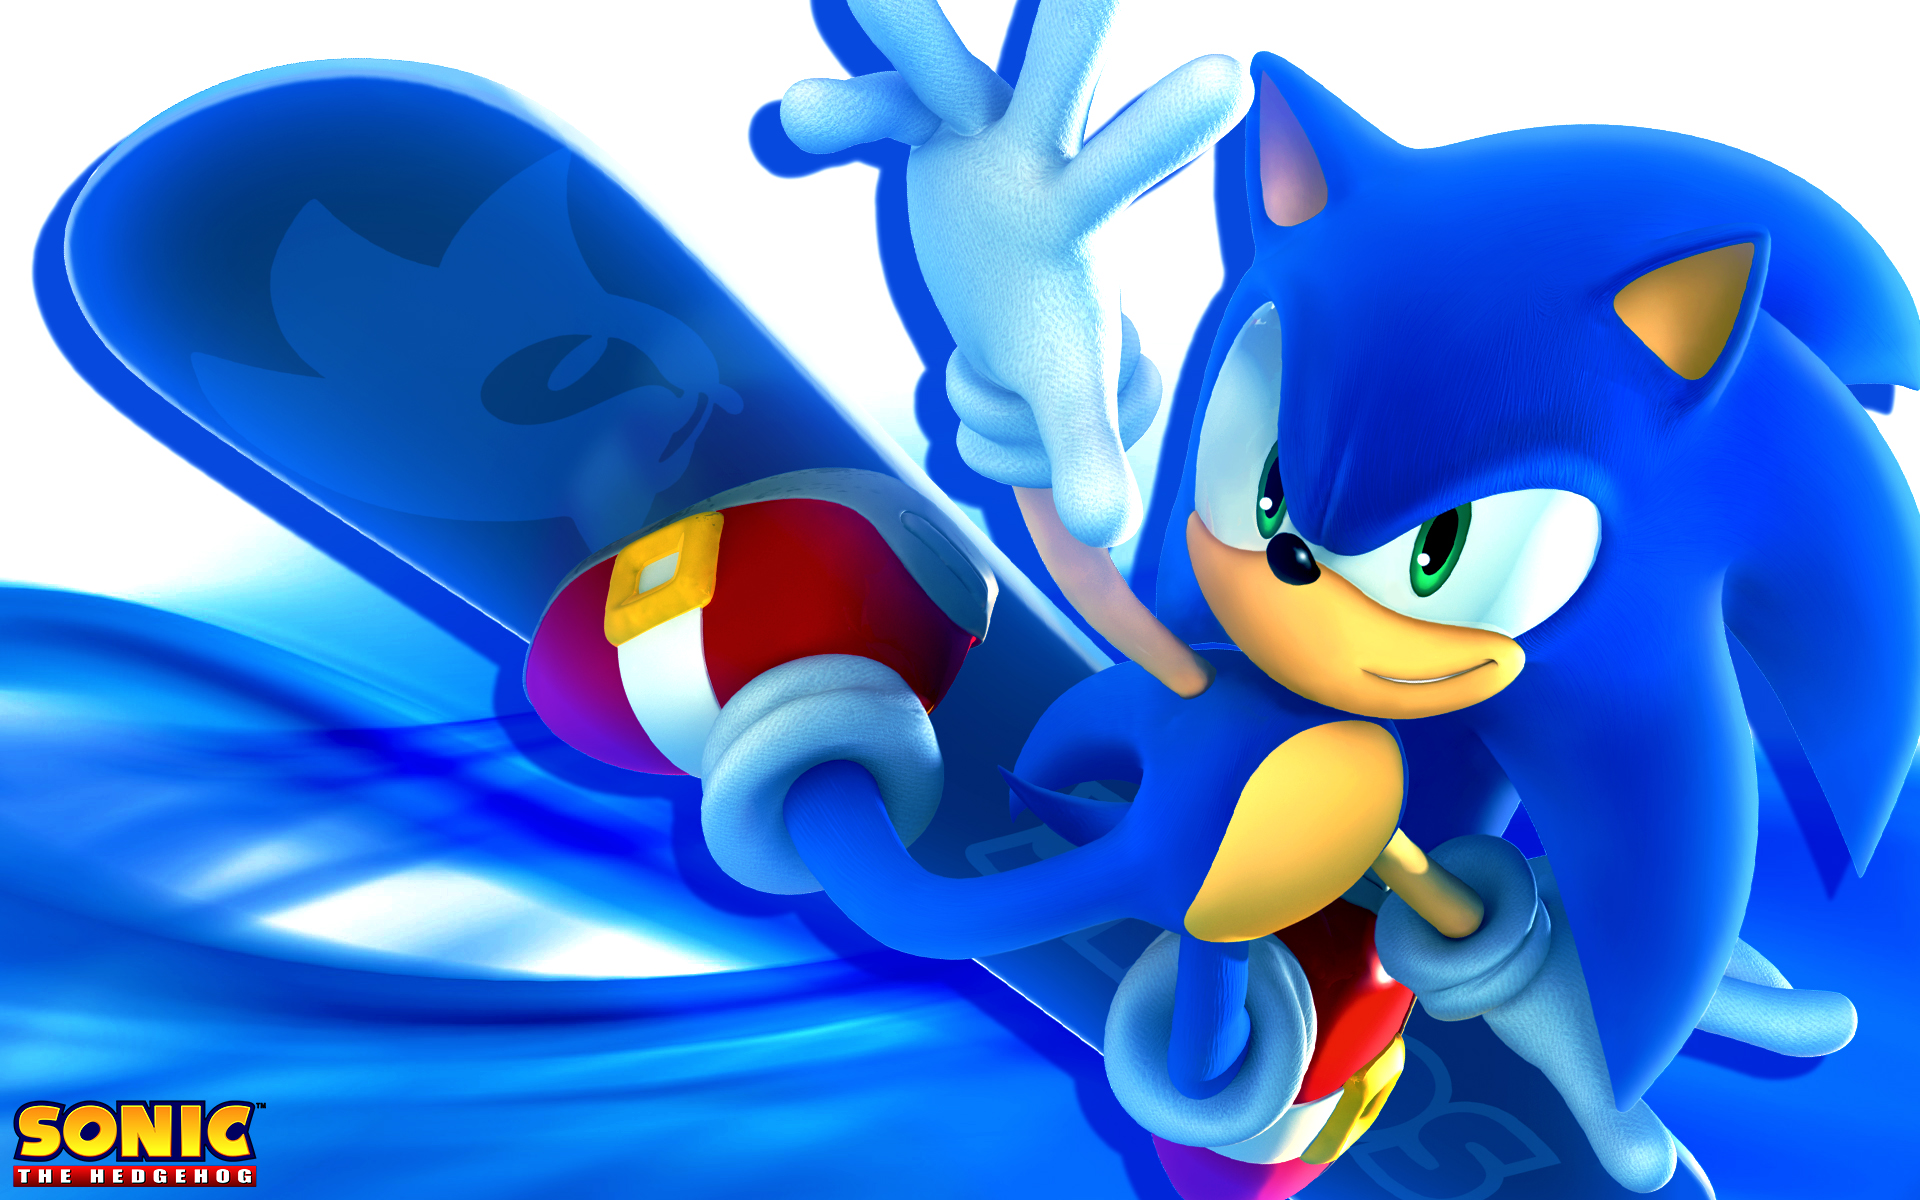 Sonic the Hedgehog Wallpaper for Computer